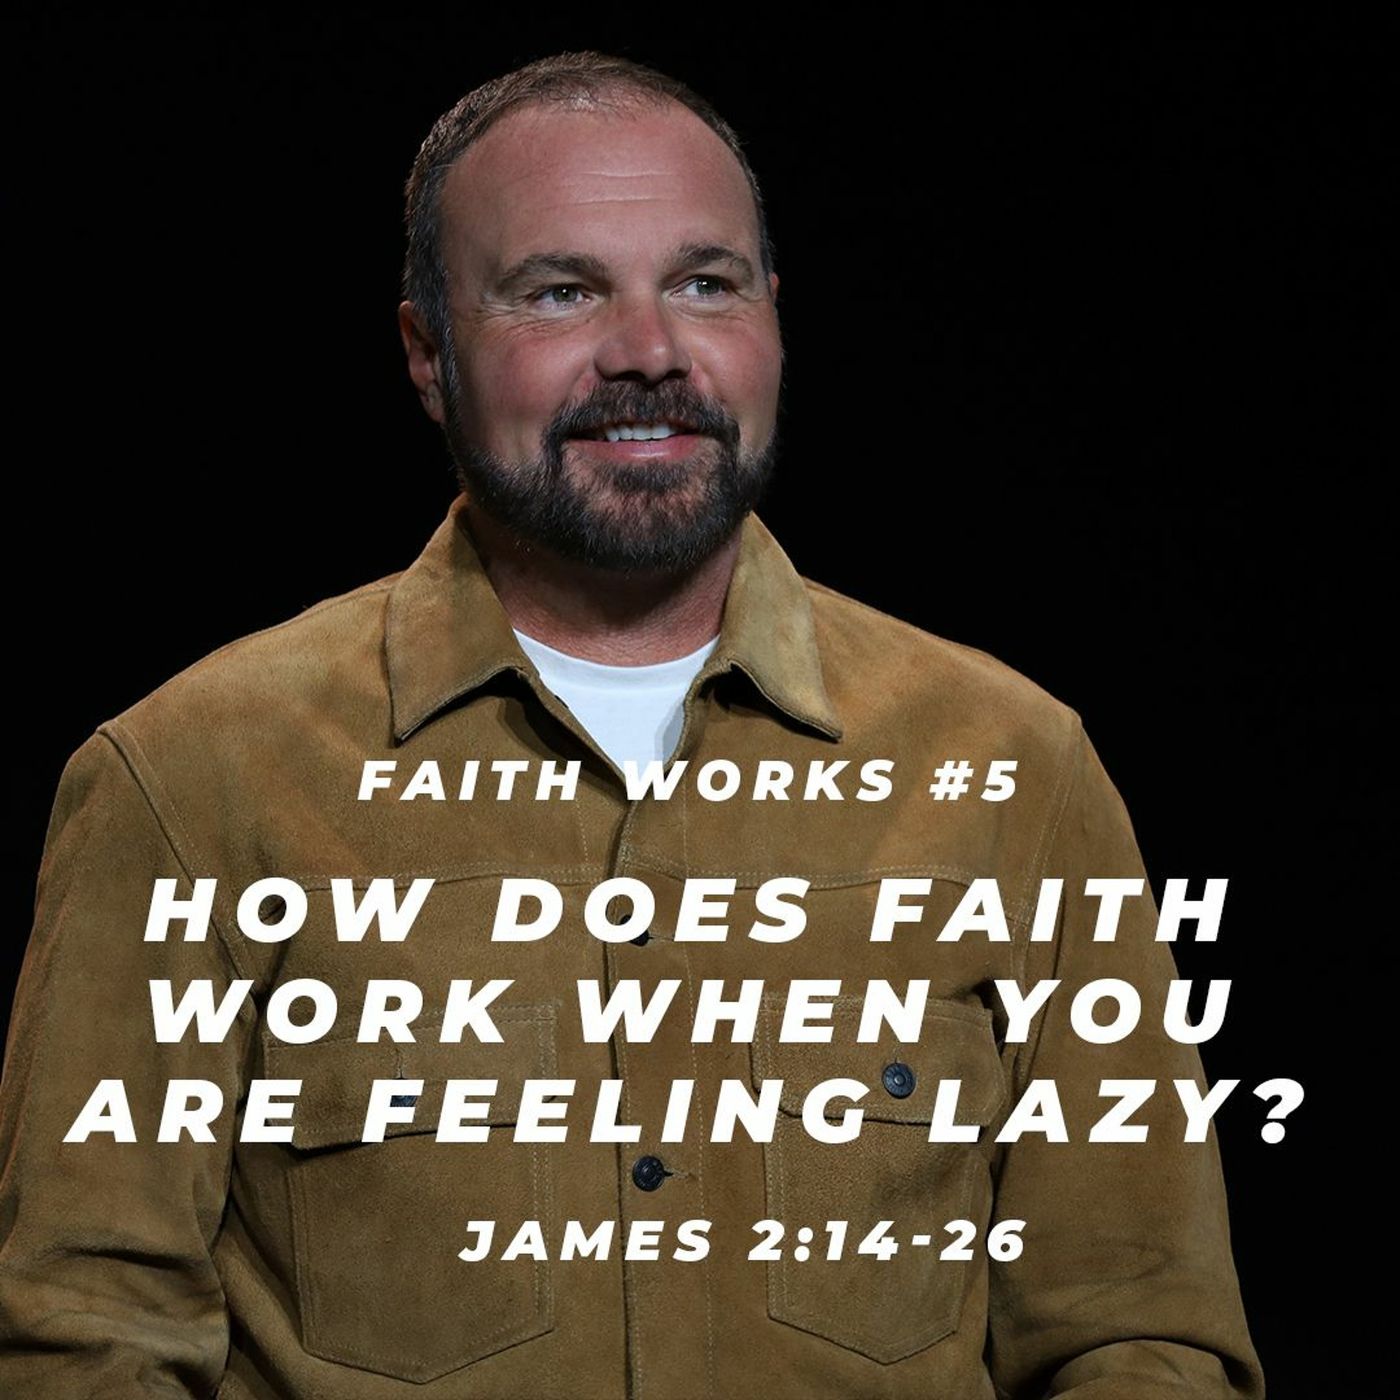 James #5 - How does faith work when you are feeling lazy